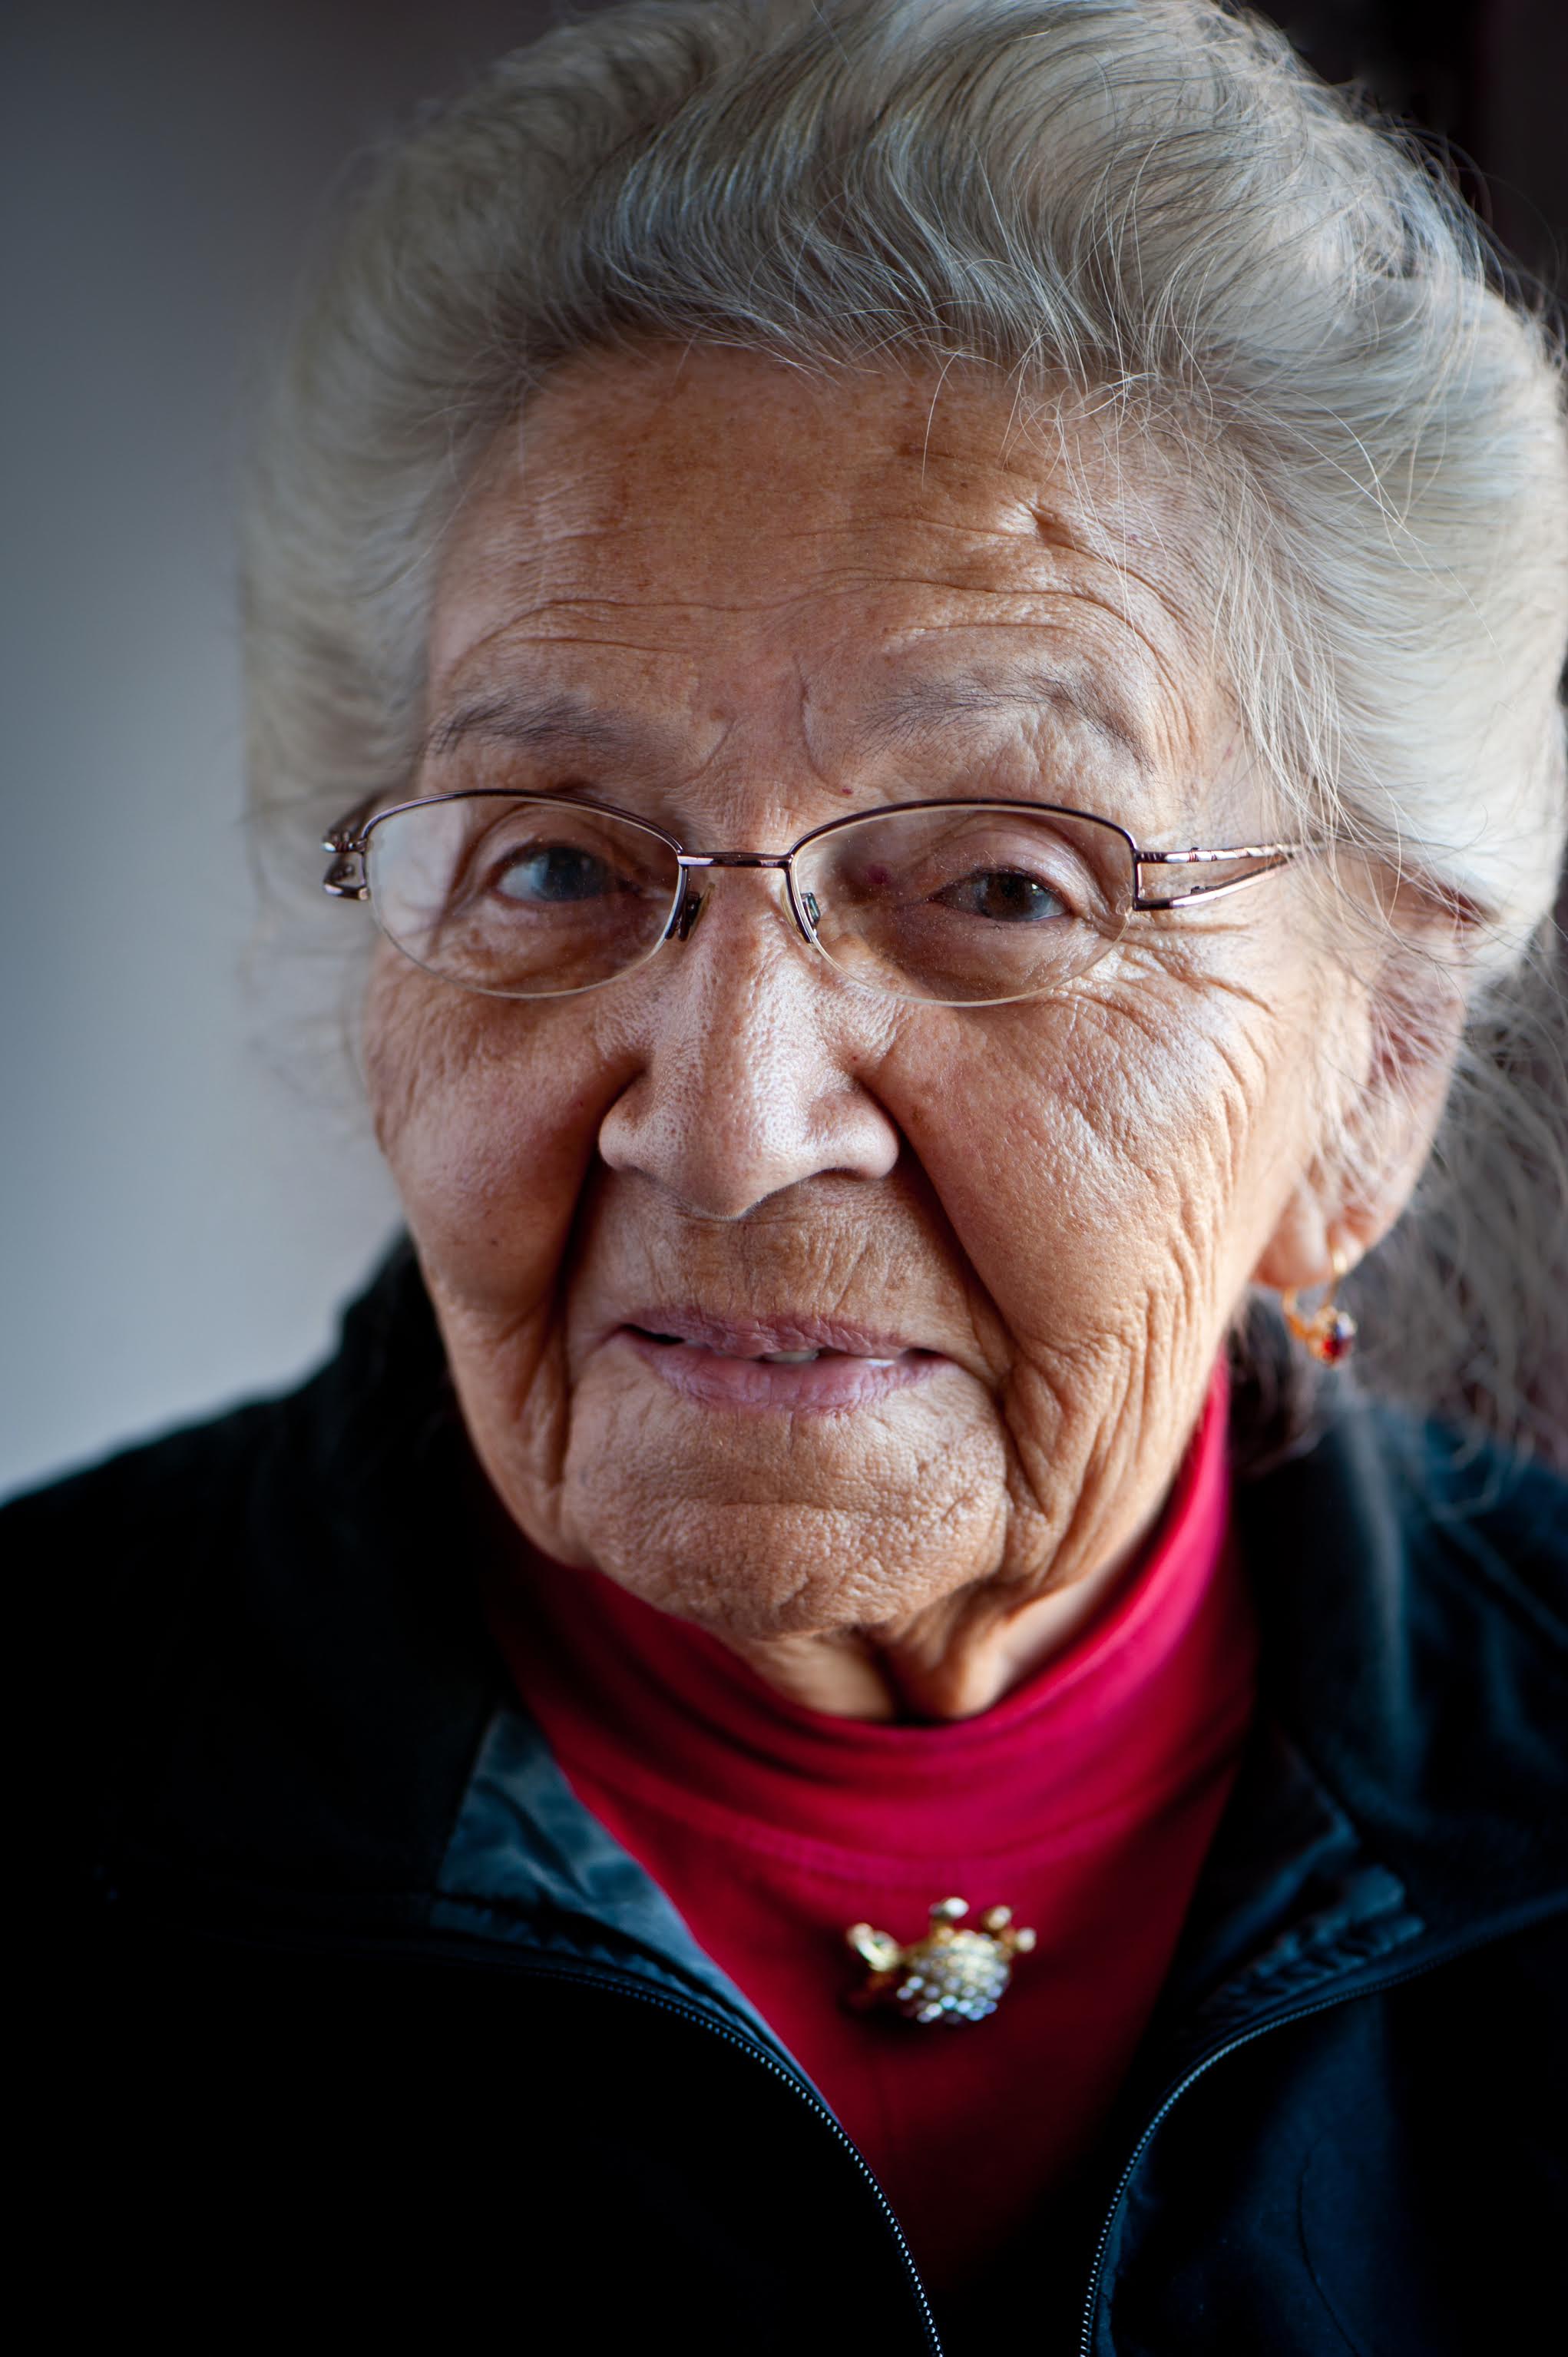 Marcella LeBeau said one of the great honors and privileges of her life was to be a nurse in World War II, where she tended the injured on D-Day and at the Battle of the Bulge. Her great-grandfather, Joseph Four Bear, signed the 1868 Fort Laramie Treaty, which established the Great Sioux Reservation.